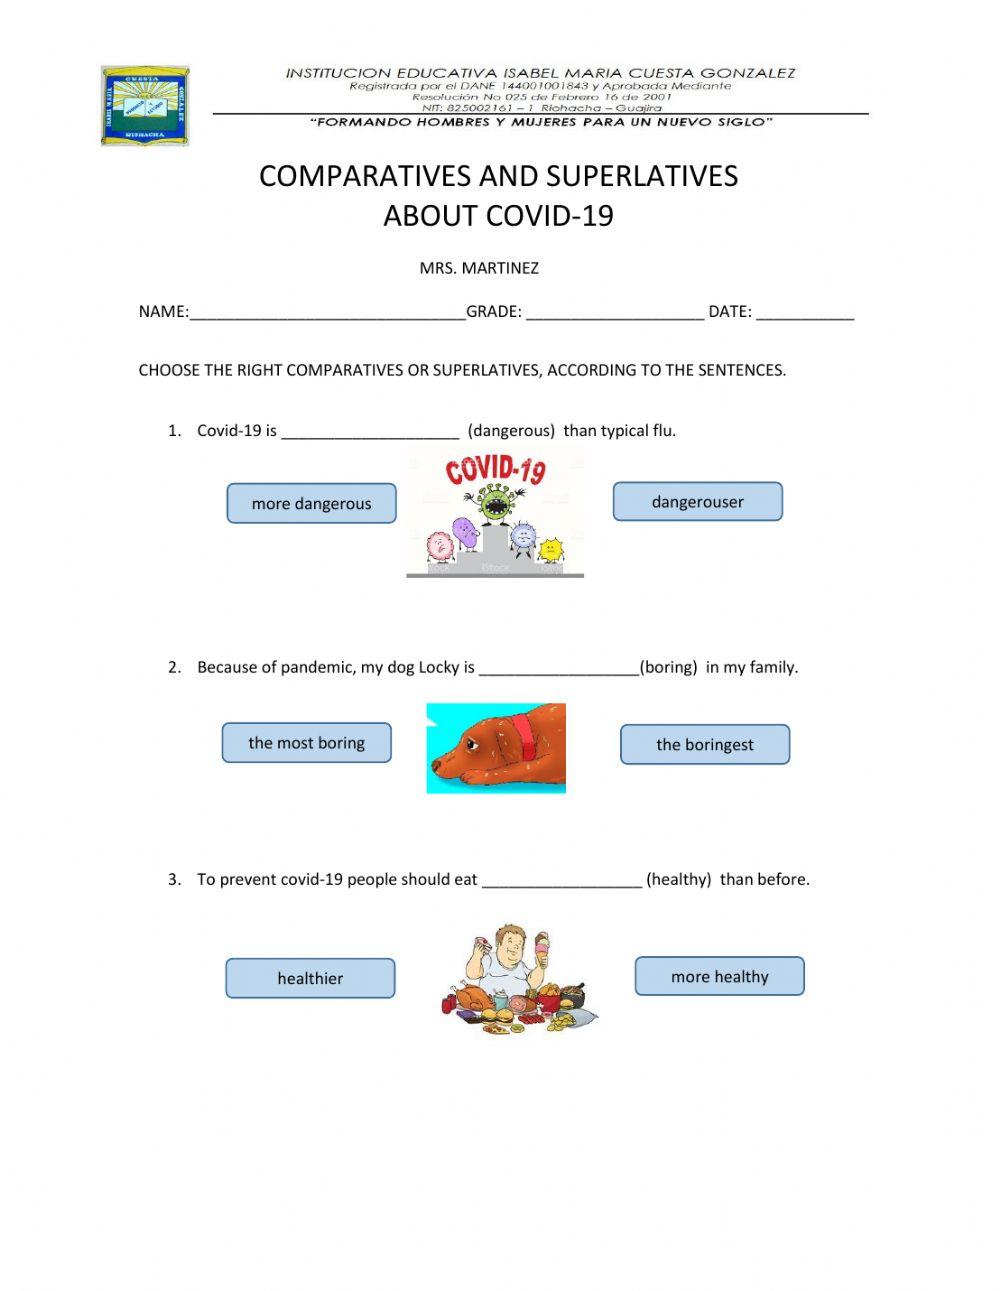 Comparative and superlatives about covid-19